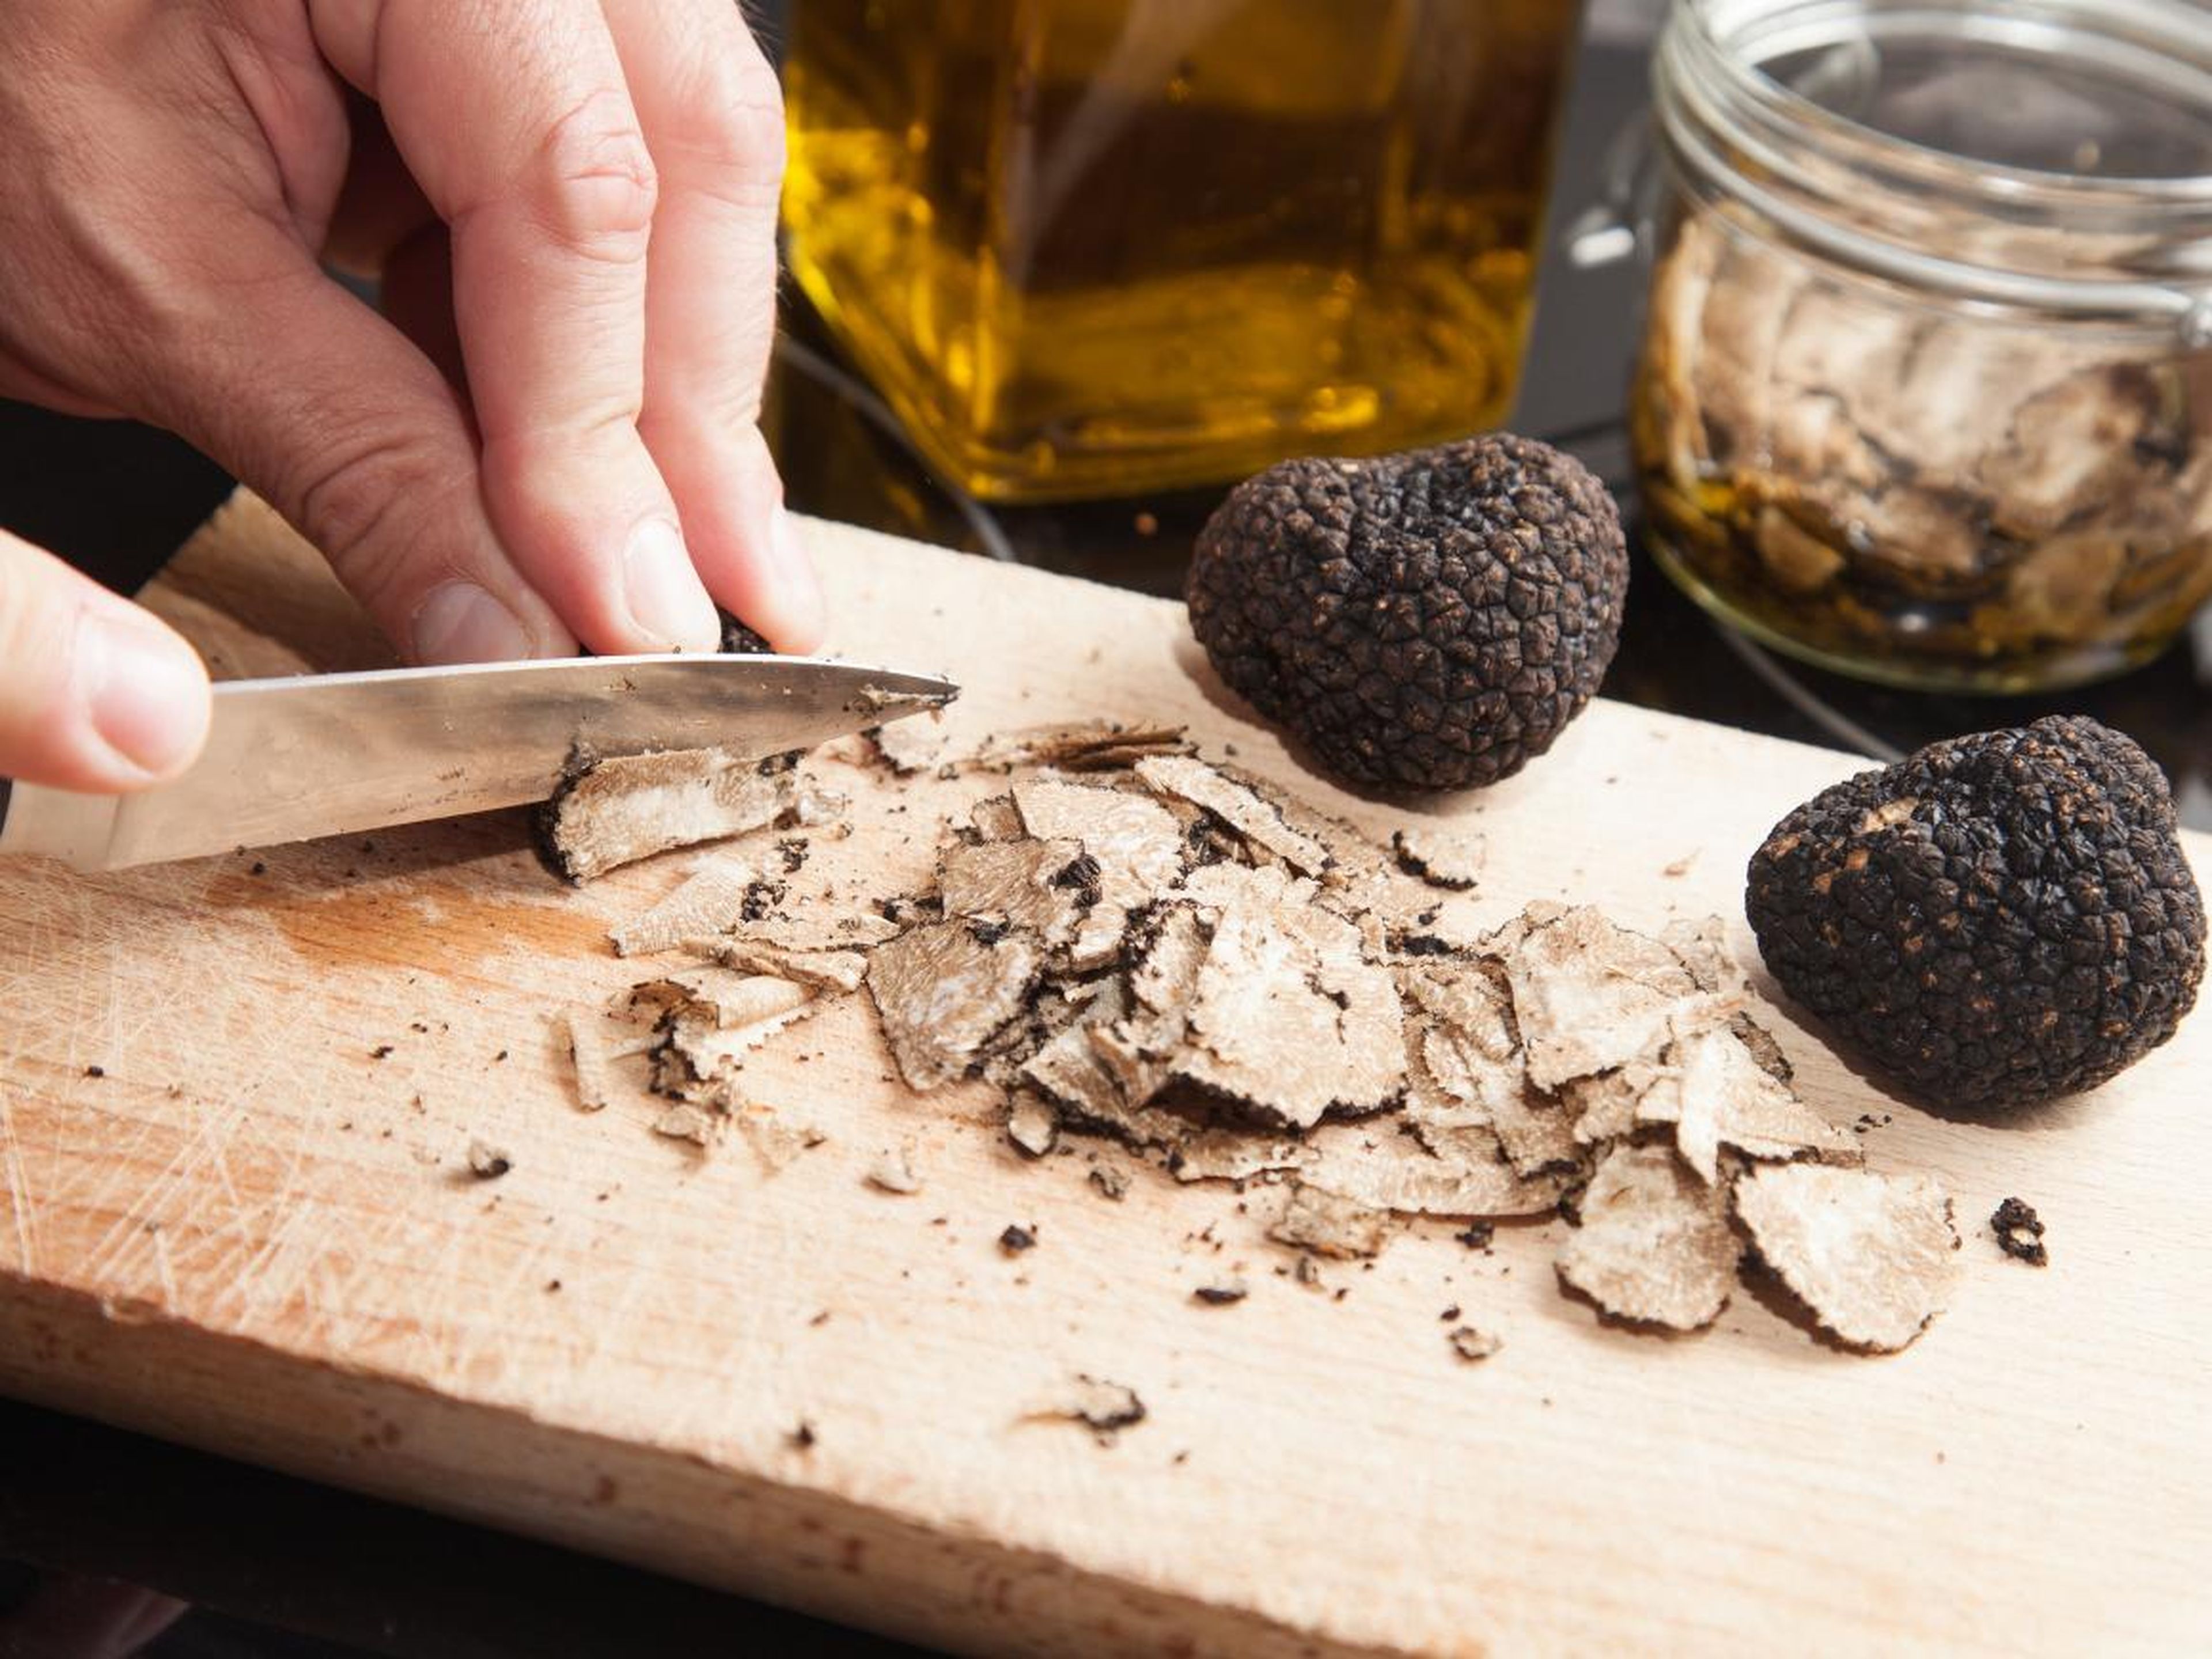 Truffle oil oftentimes contains no truffles.